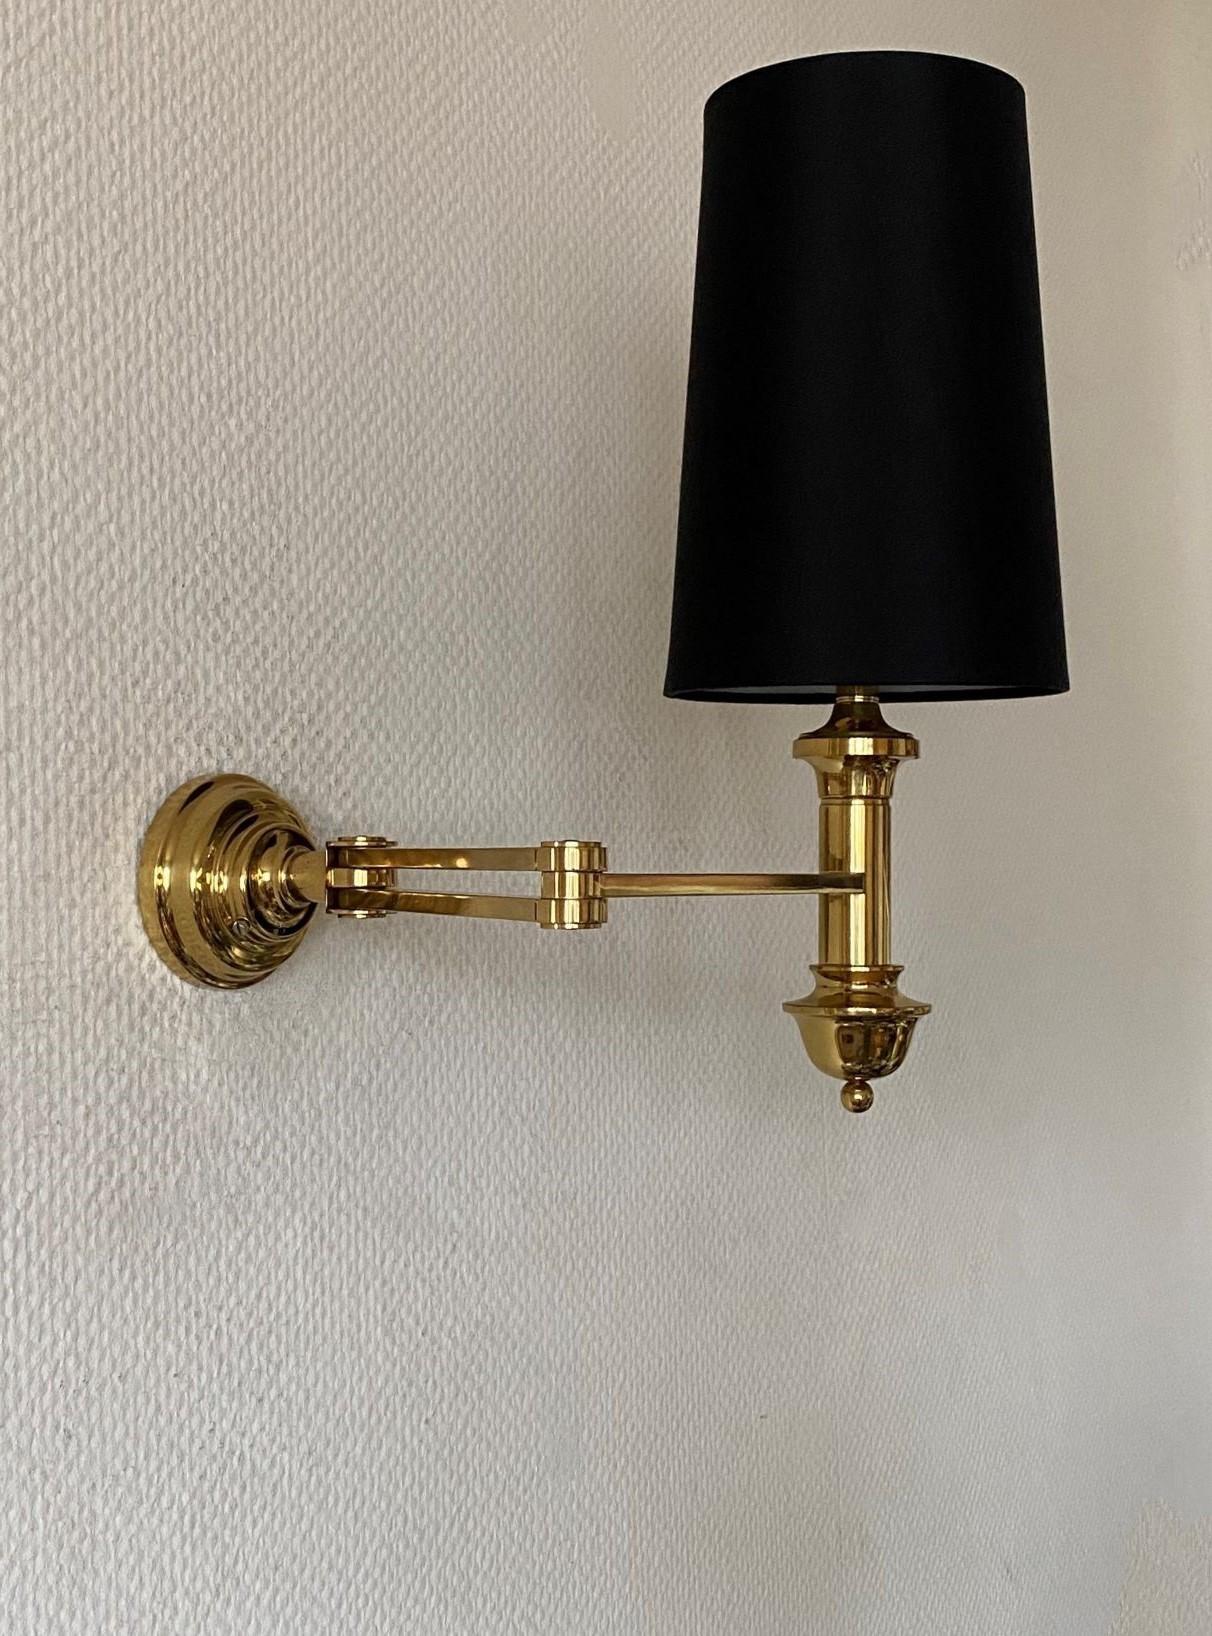 Pair of Brass Swing Arm Wall Lights, 1960s For Sale 1